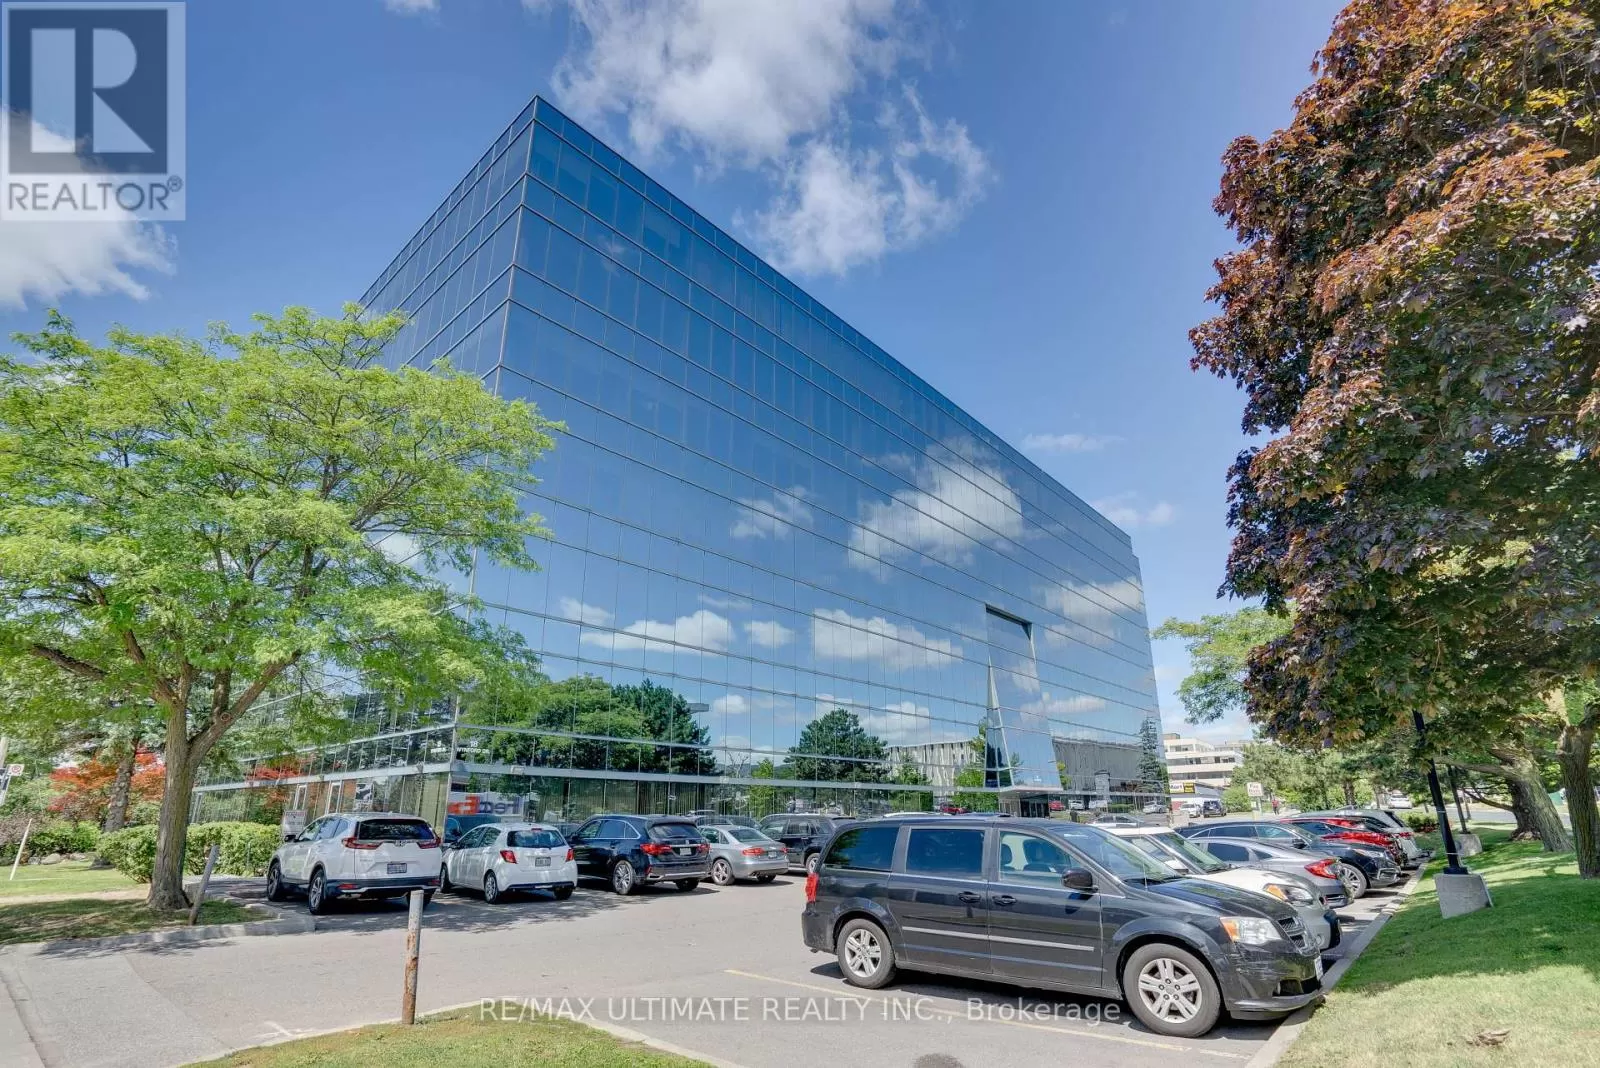 Offices for rent: 514 - 18 Wynford Drive, Toronto, Ontario M3C 3S2